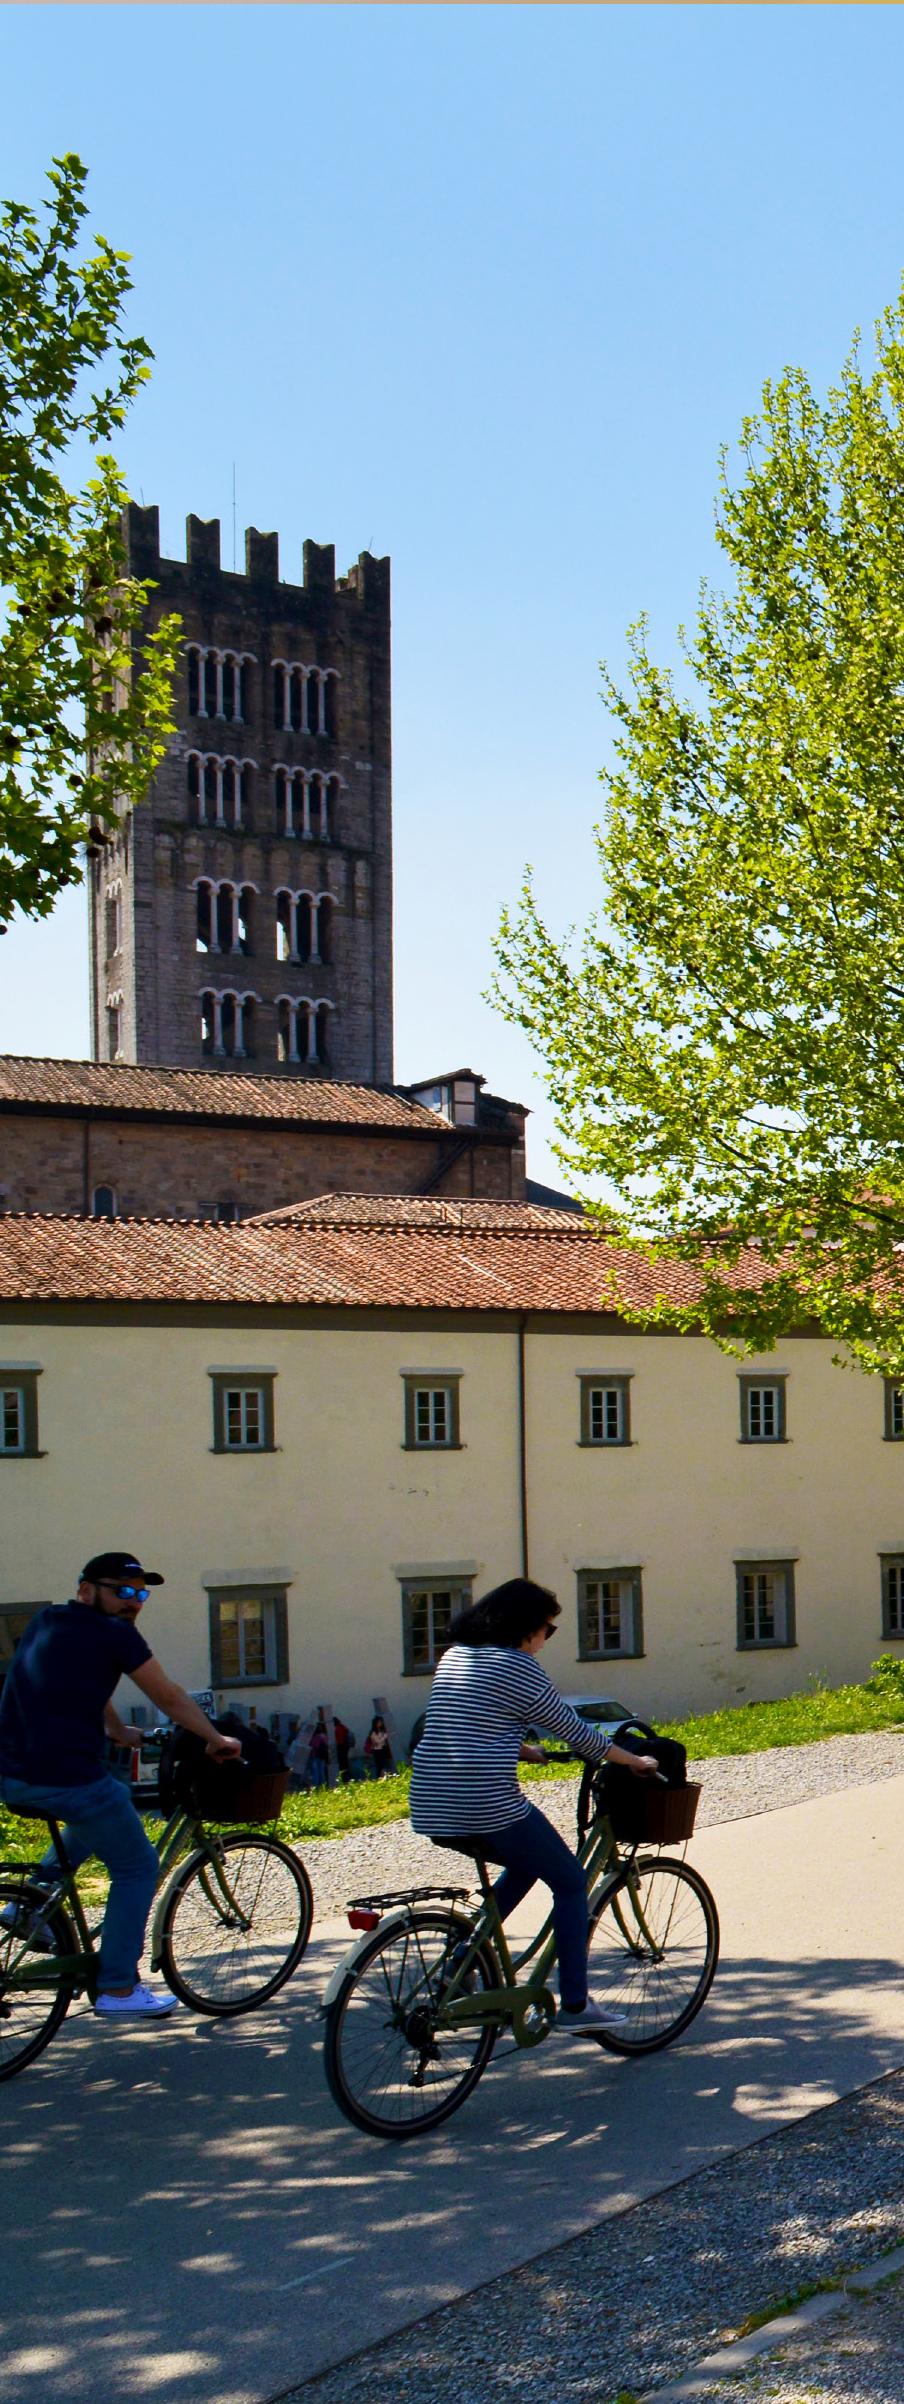 WHAT'S NEARBY Marlia, Cappannori (historic villas and gardens, basic shopping) 10 minutes on foot, 5 minutes in car Lucca (historic center, park and rental bikes, all shopping, train) 7 minutes Forte